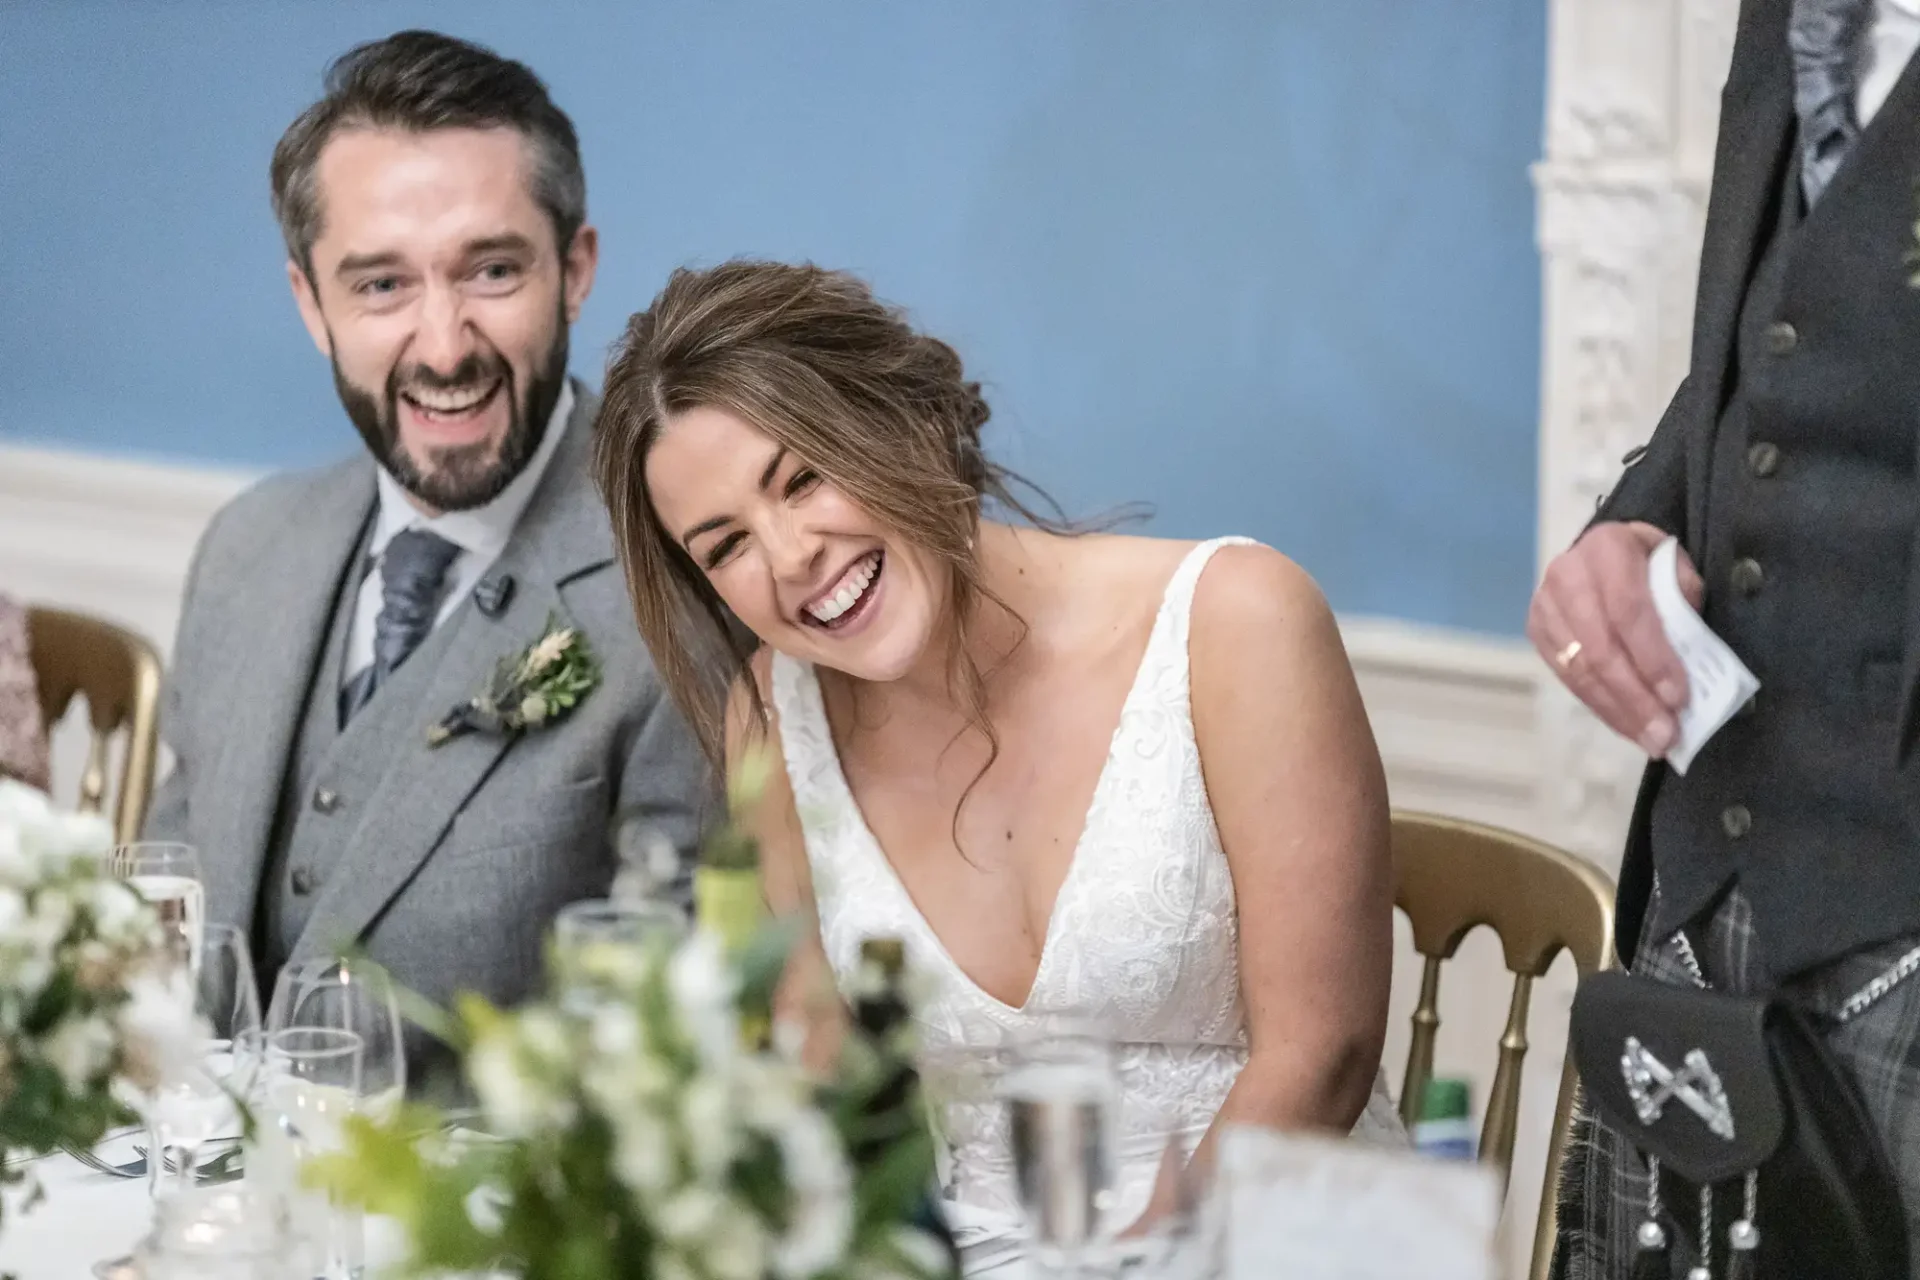 A beaming bride and groom laugh at a wedding reception table, surrounded by elegant dinner settings in a well-lit room.